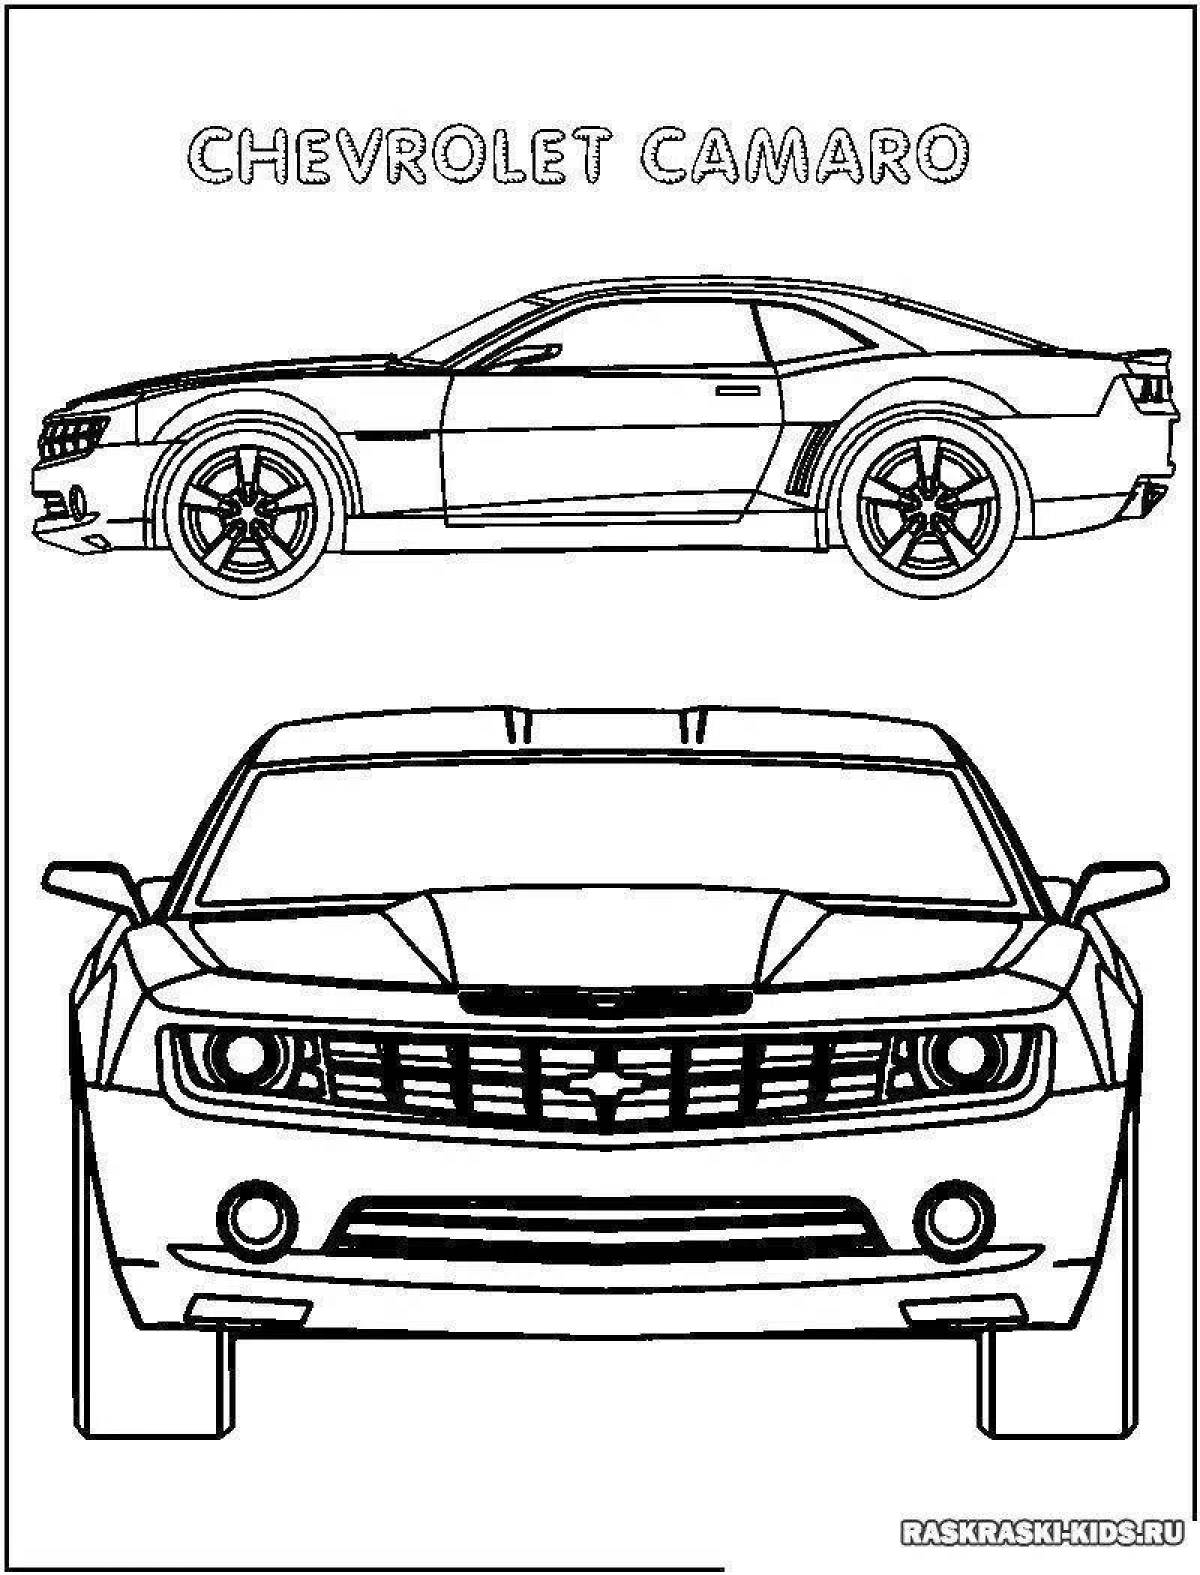 Colorfully detailed camaro coloring page